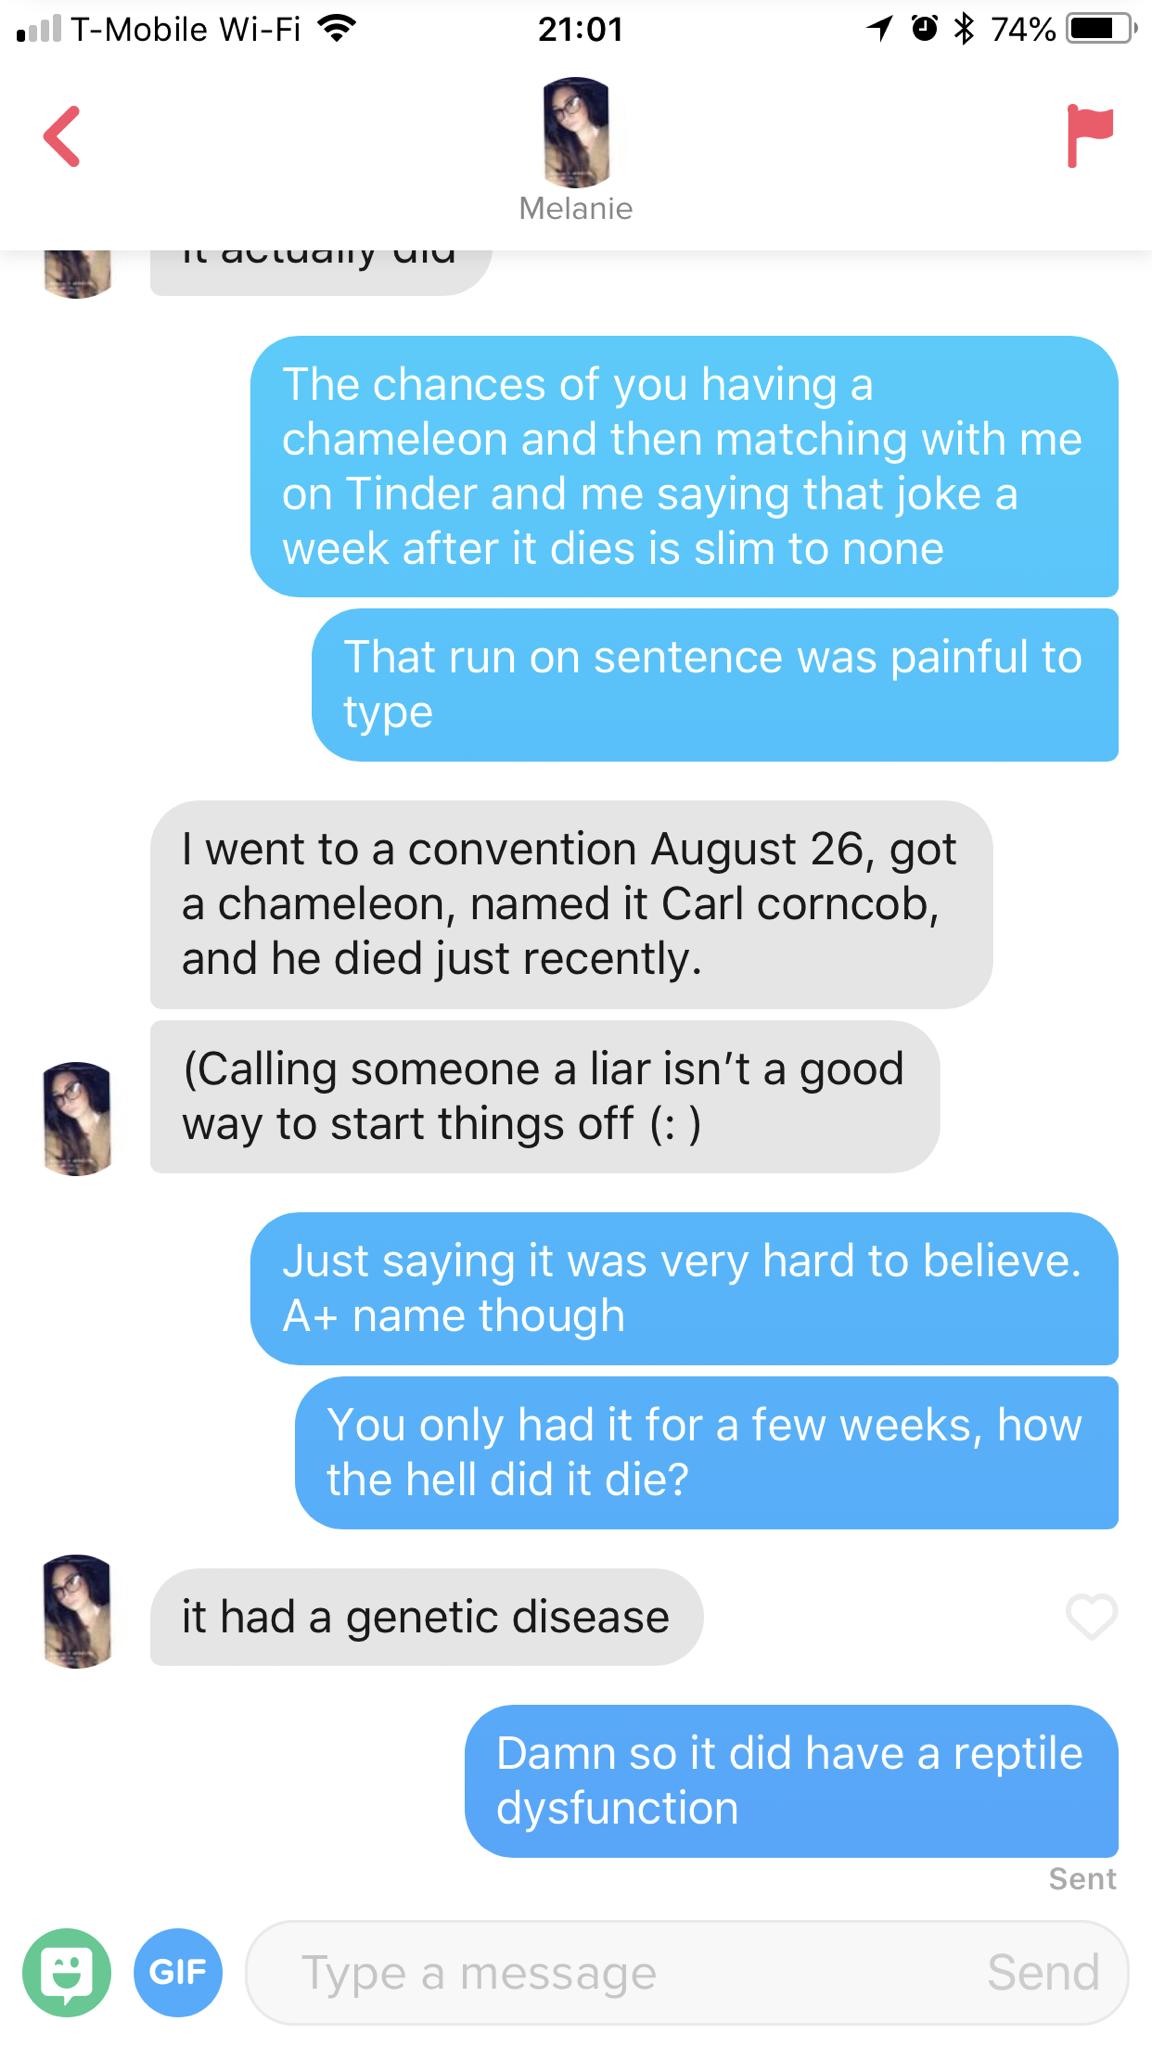 The Most Cringeworthy Tinder Conversation You'll See Today